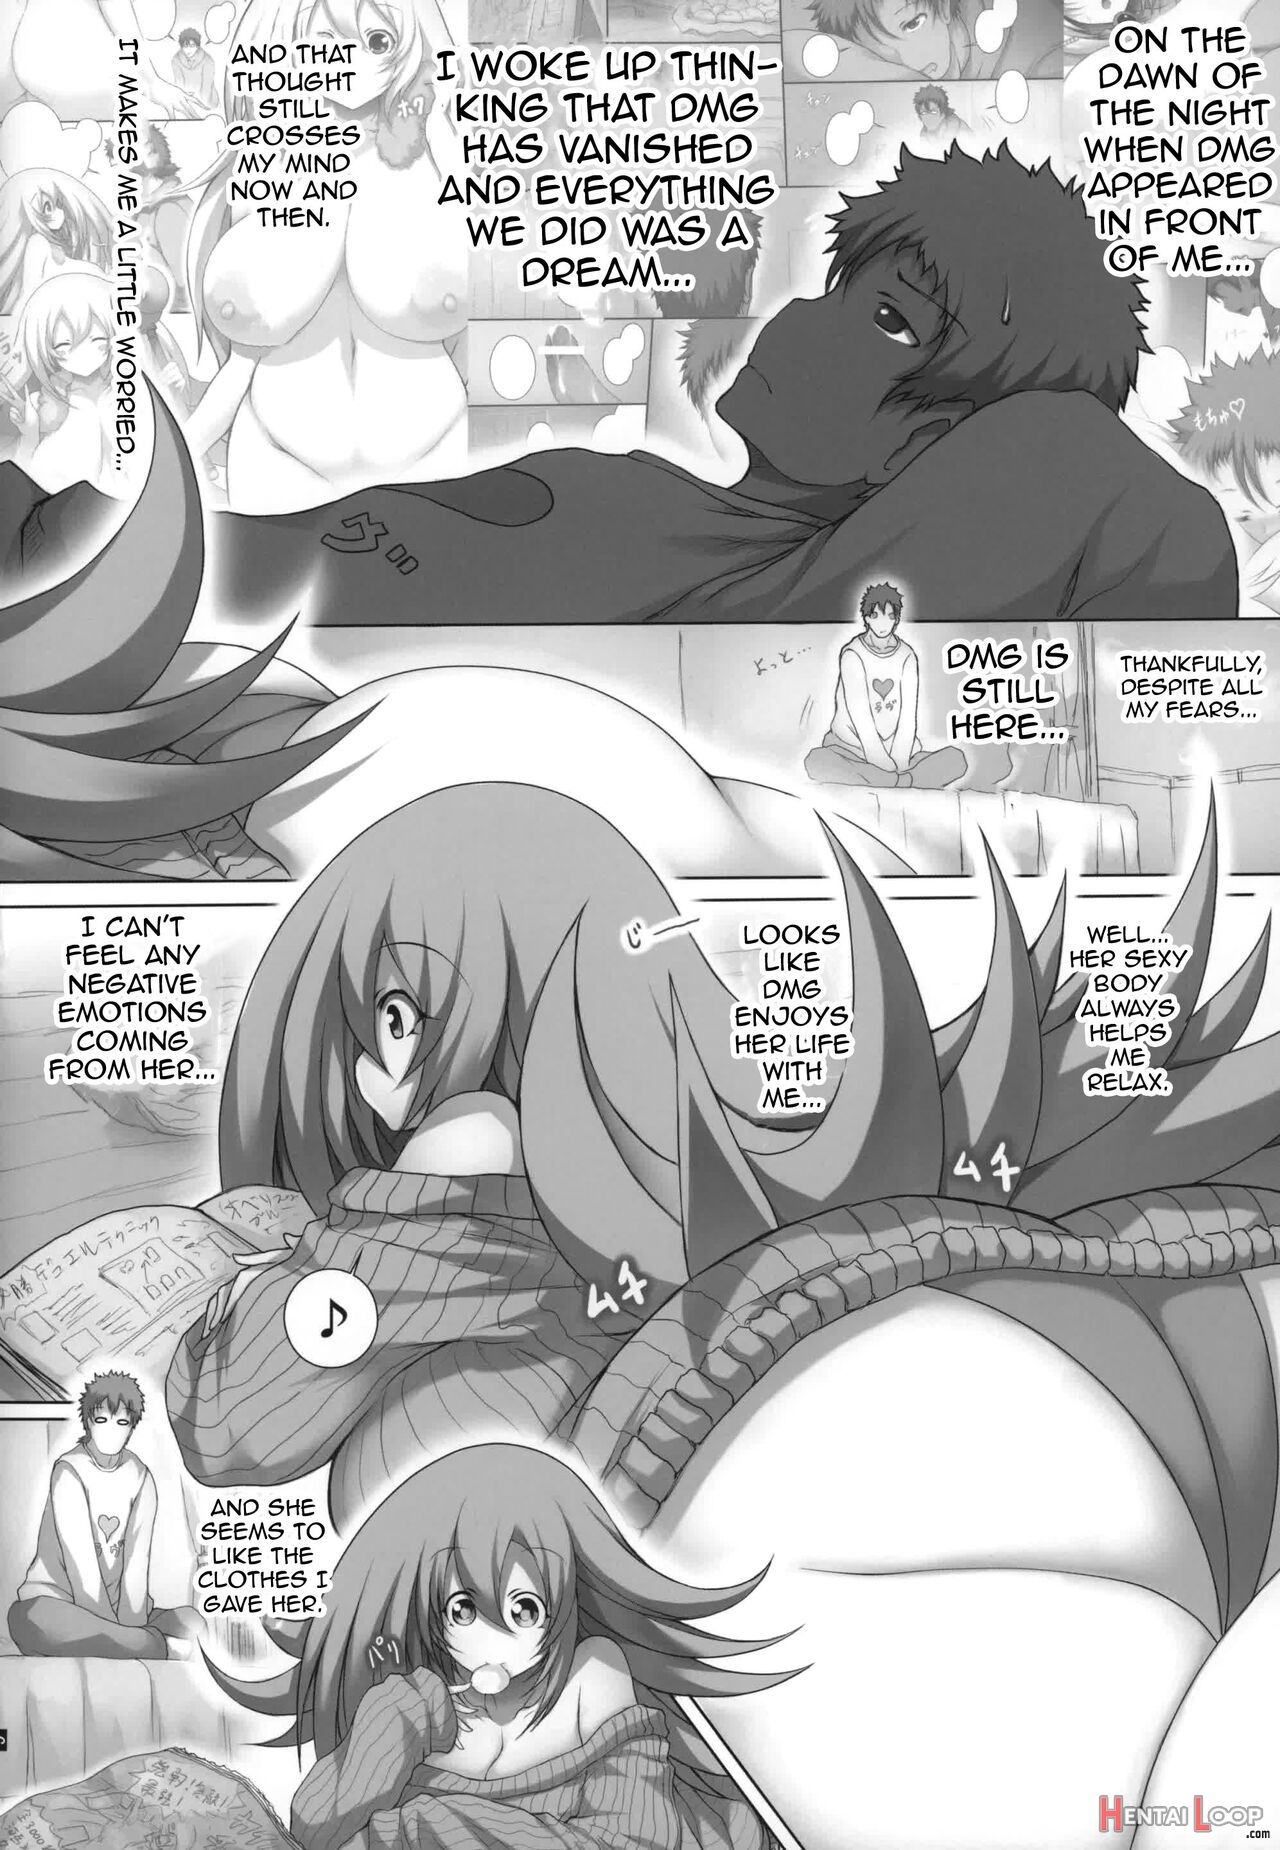 Together With Dark Magician Girl 2 page 7